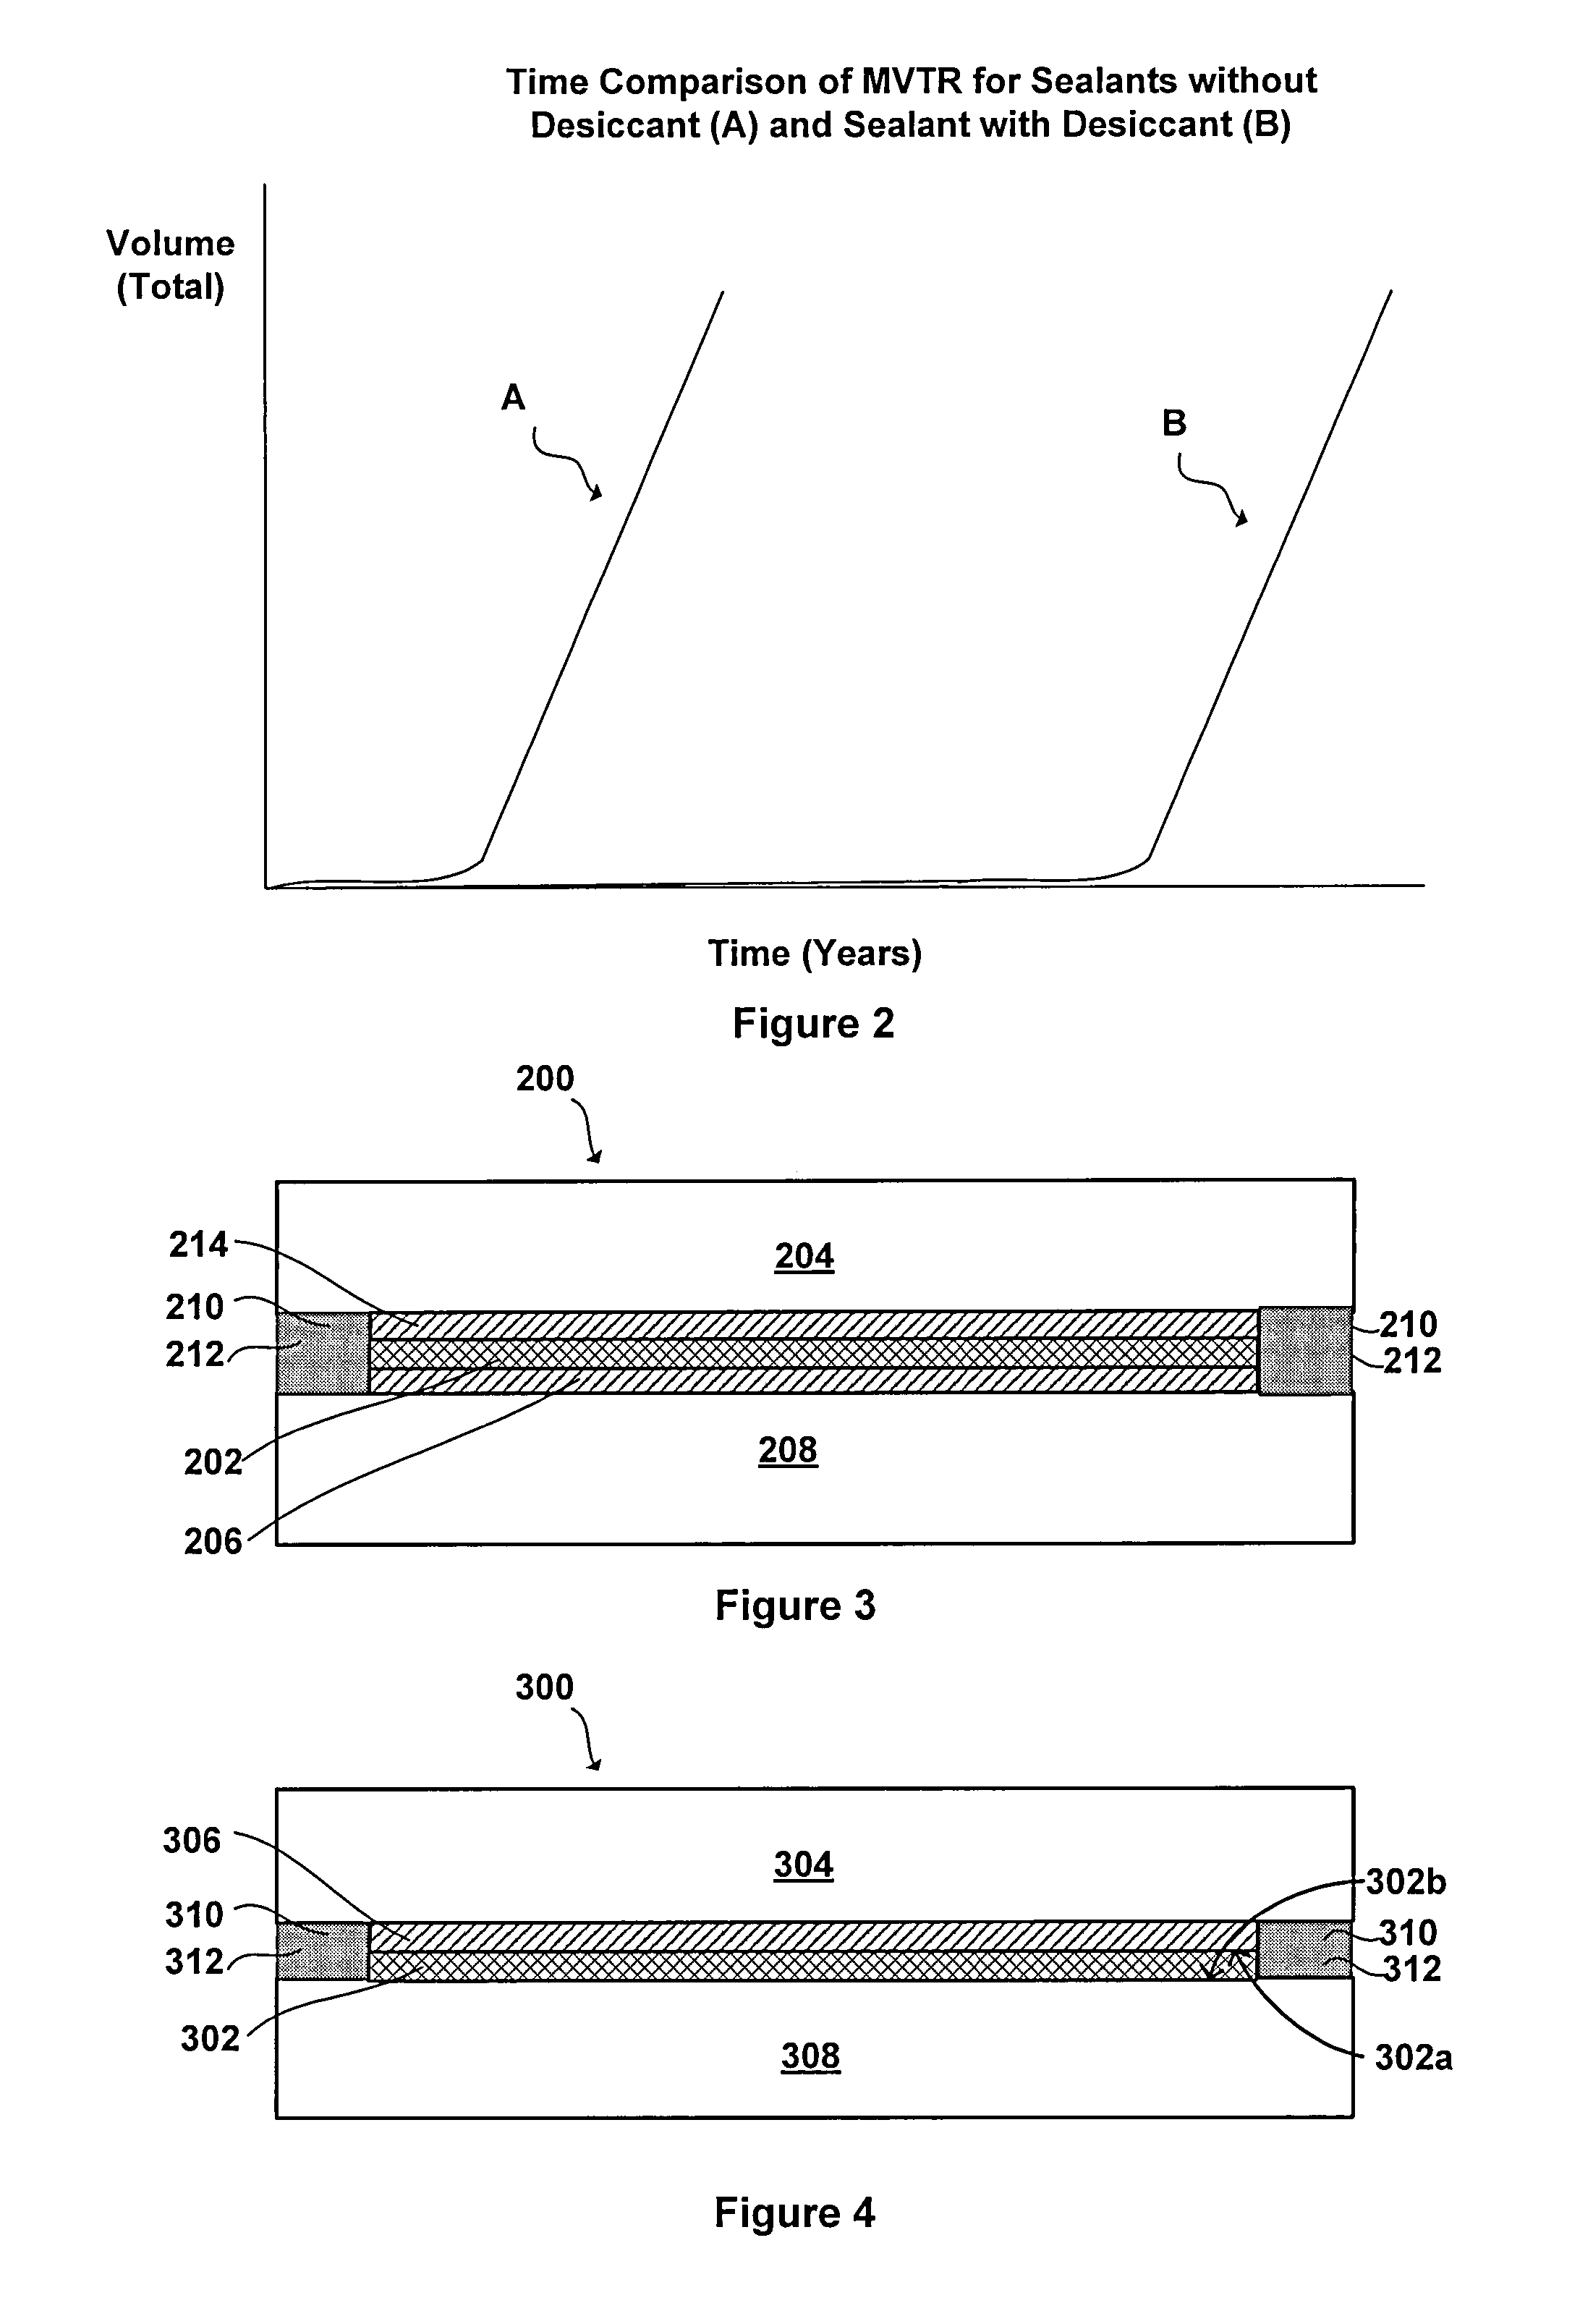 Hot melt sealant containing desiccant for use in photovoltaic modules